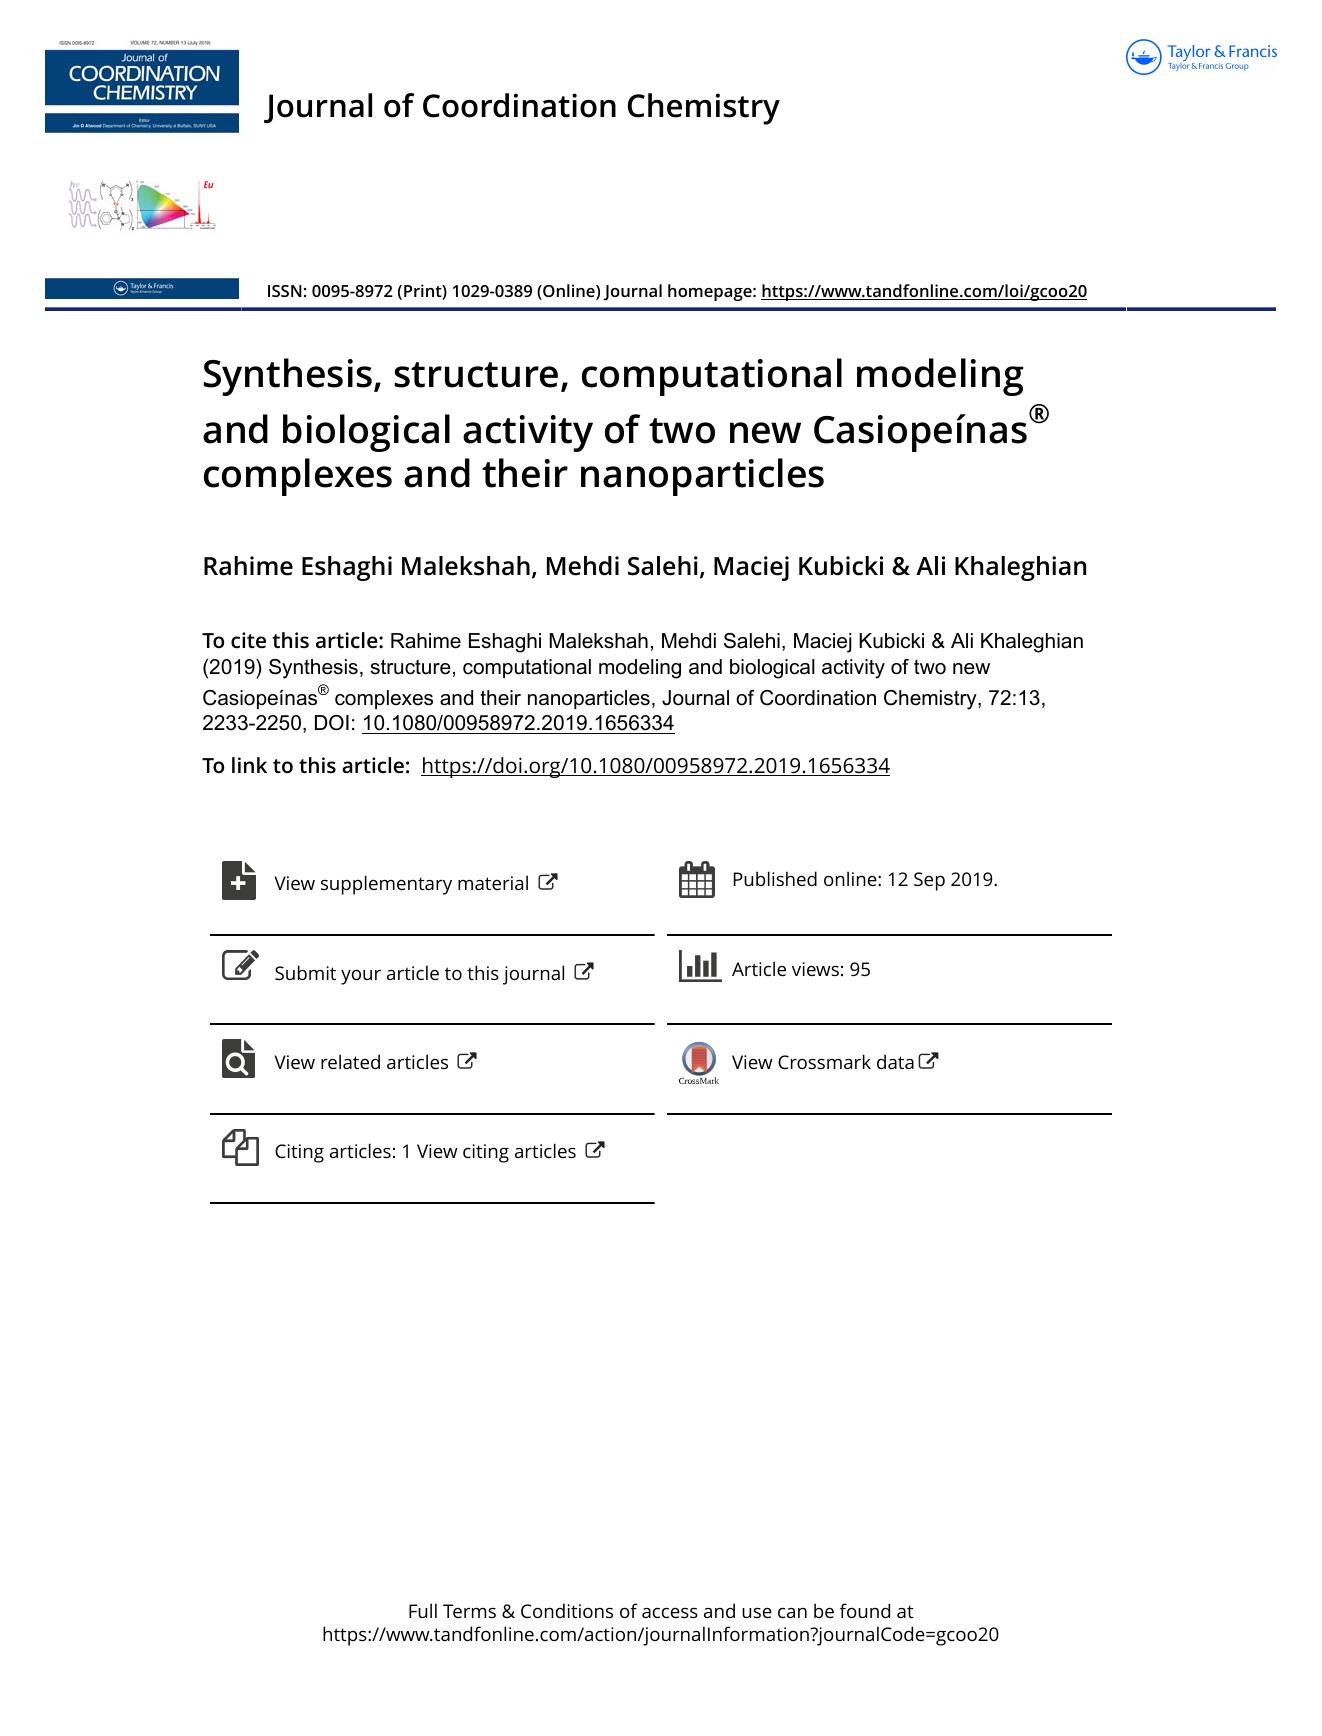 Synthesis, structure, computational modeling and biological activity of two new CasiopeÃ­nasÂ® complexes and their nanoparticles by Malekshah Rahime Eshaghi & Salehi Mehdi & Kubicki Maciej & Khaleghian Ali